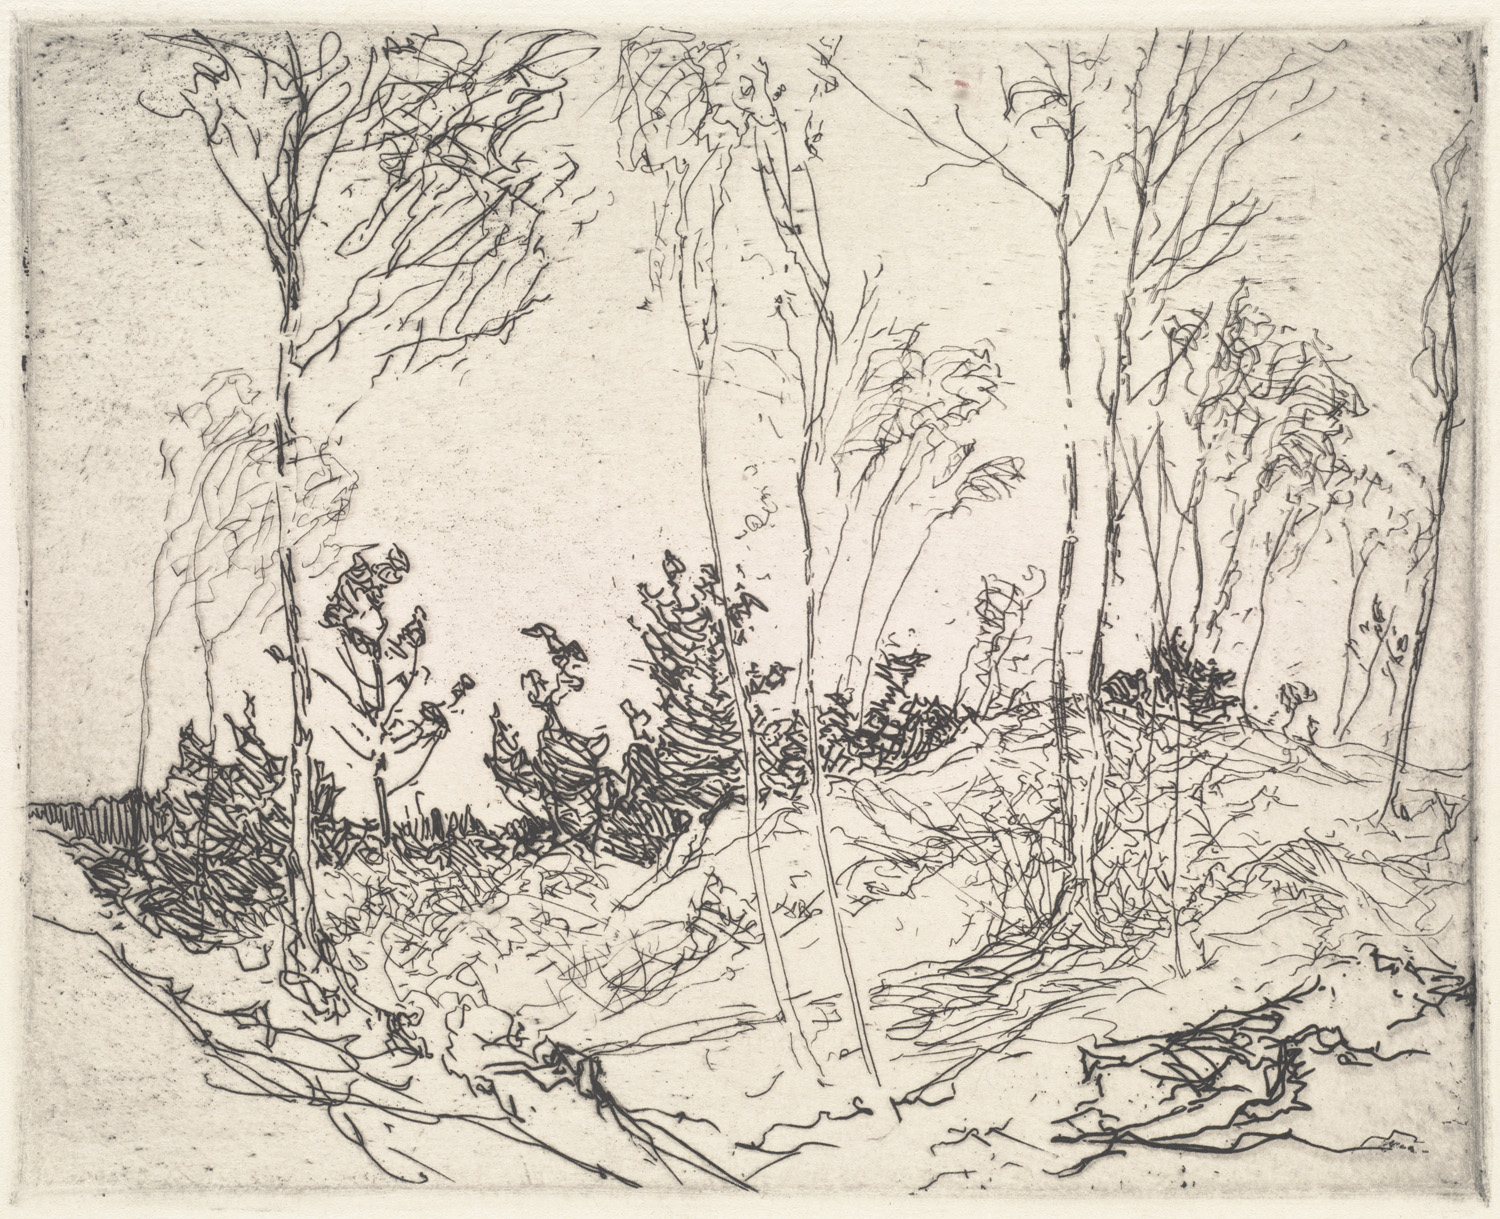 a drawing of a wooded area that is in the midst of being surrounded by debris and trees